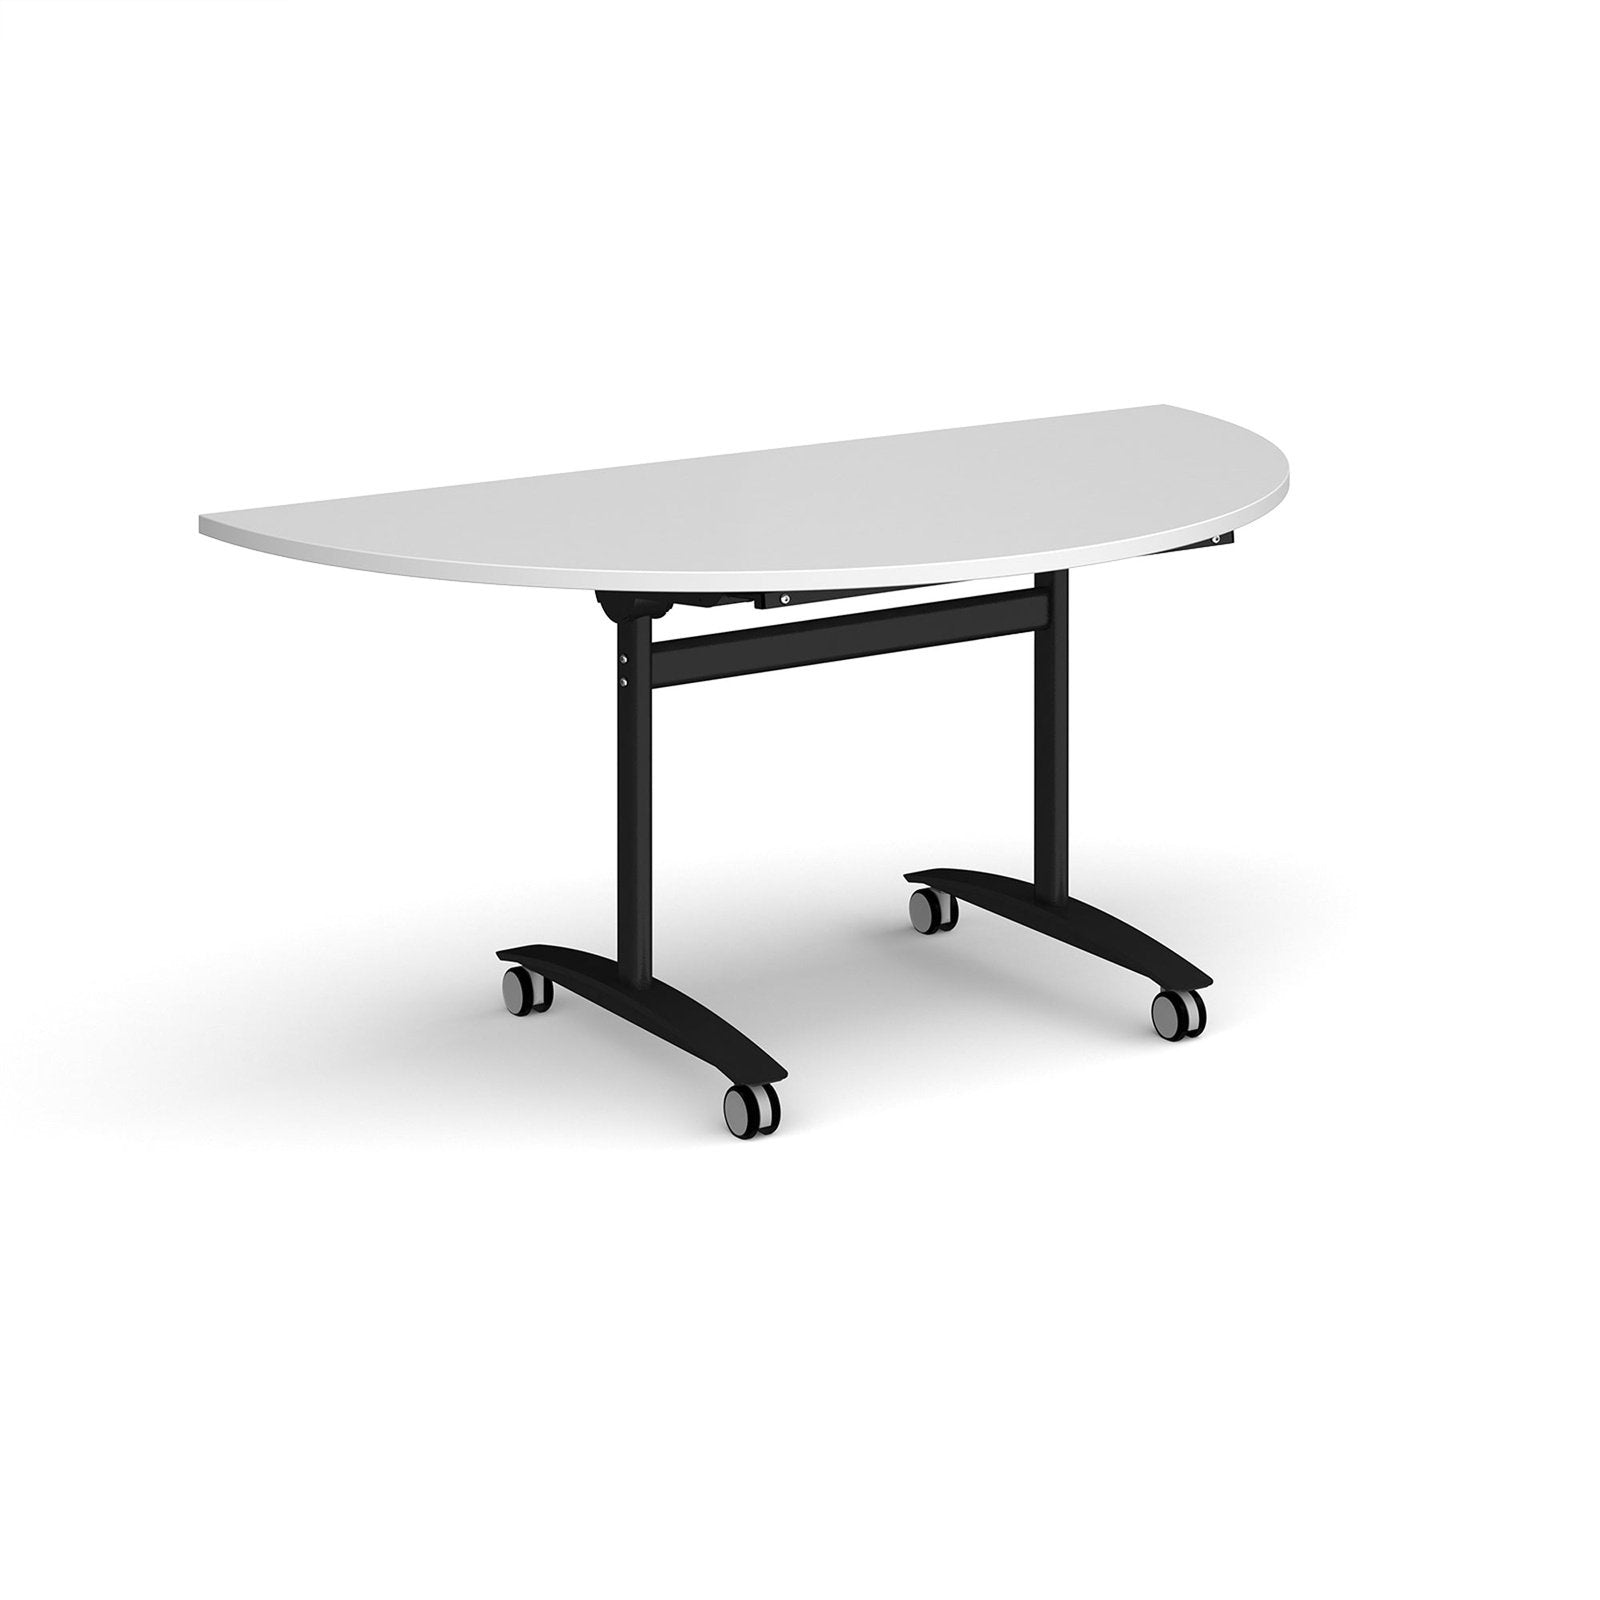 Semi circular deluxe fliptop meeting table - Office Products Online